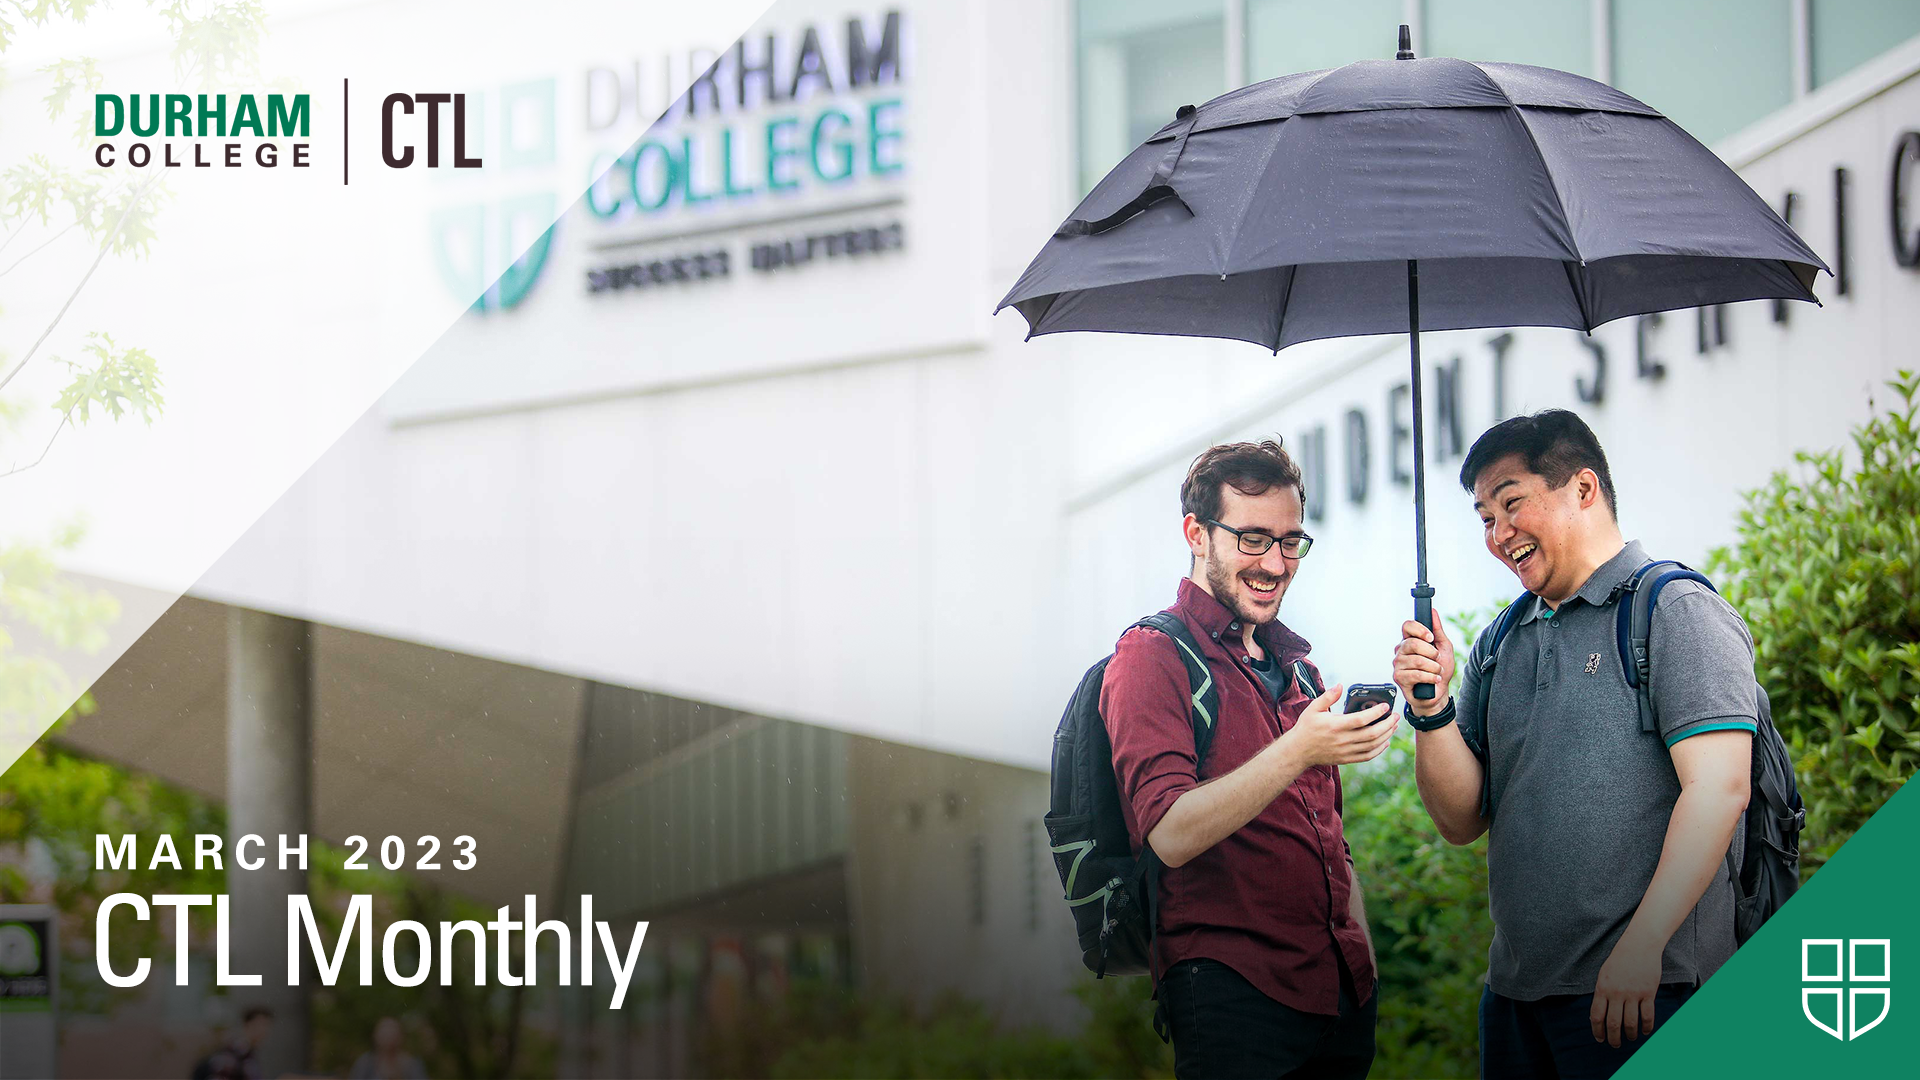 Students standing outside, under an umbrella, looking at a mobile device.